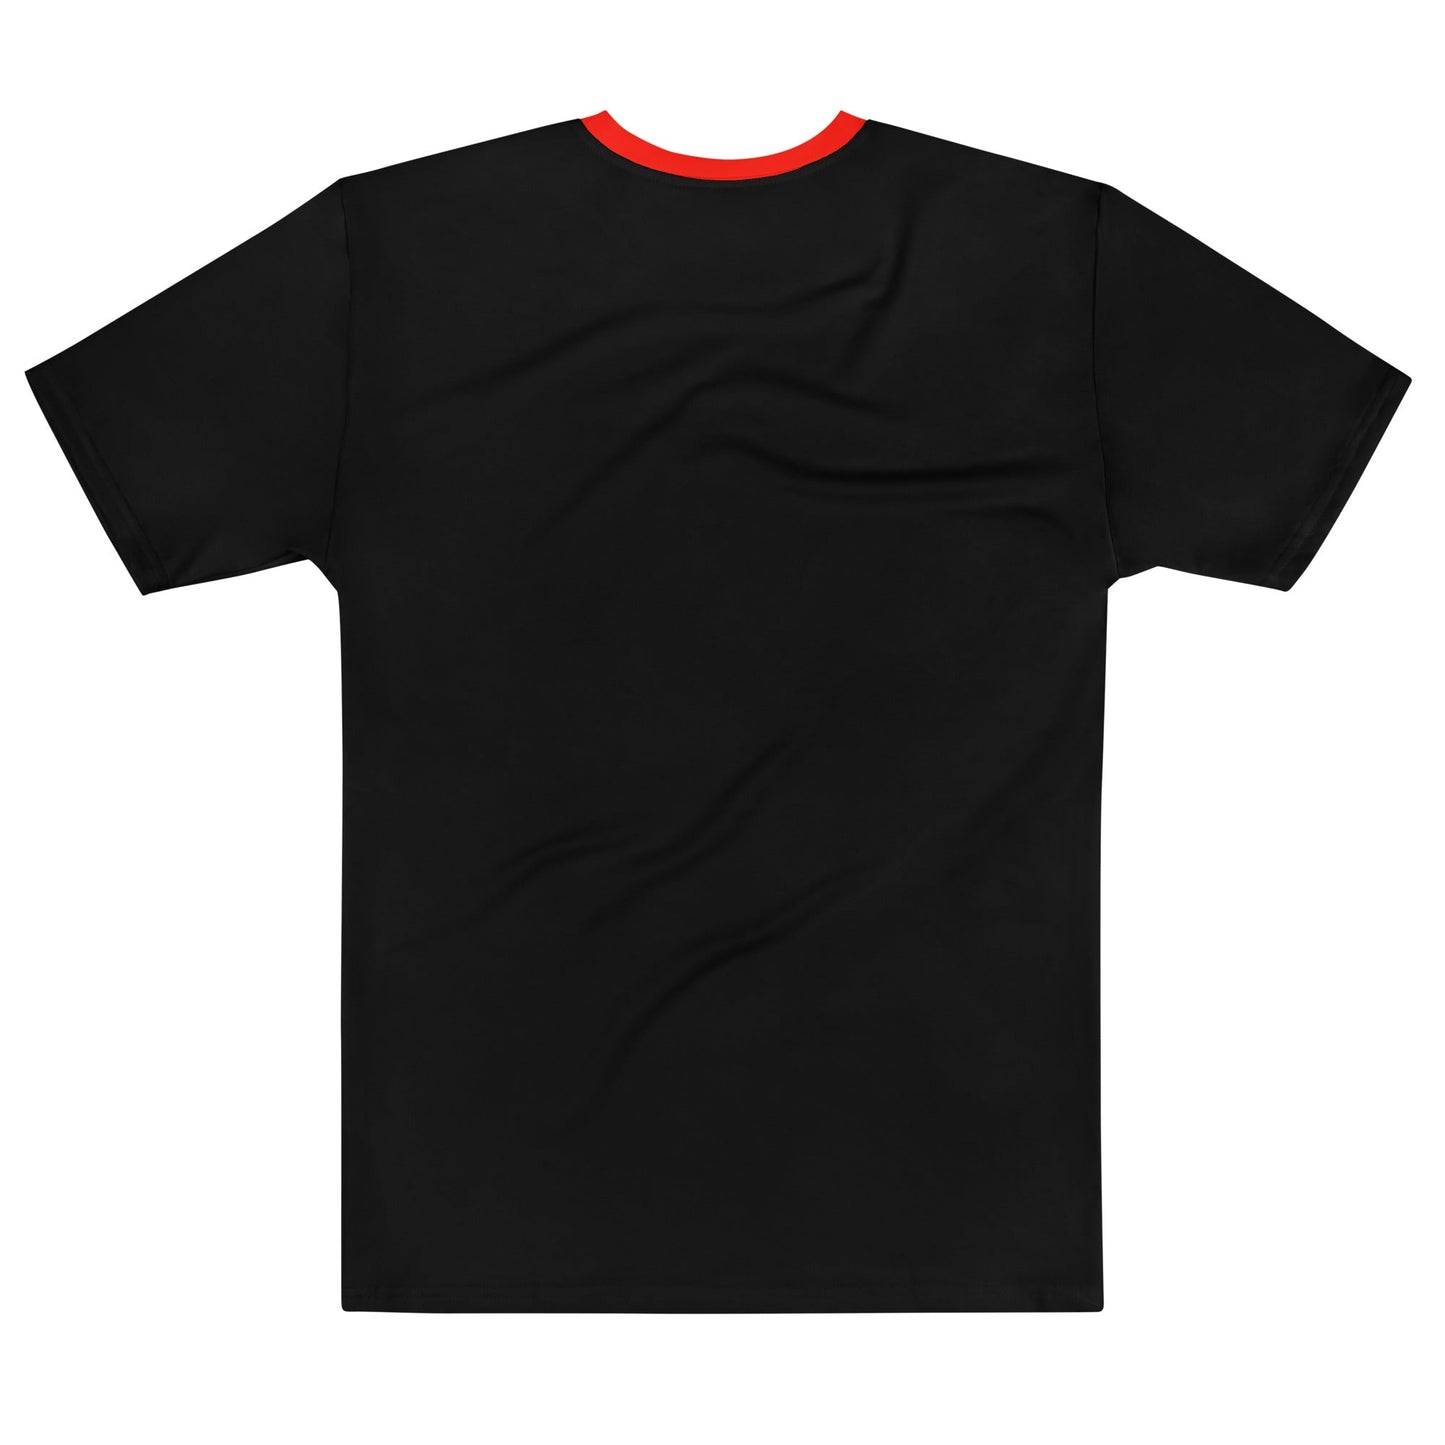 Stoner Graphic Tees: Elevate Your Look with Red and Black Graphic Shirt